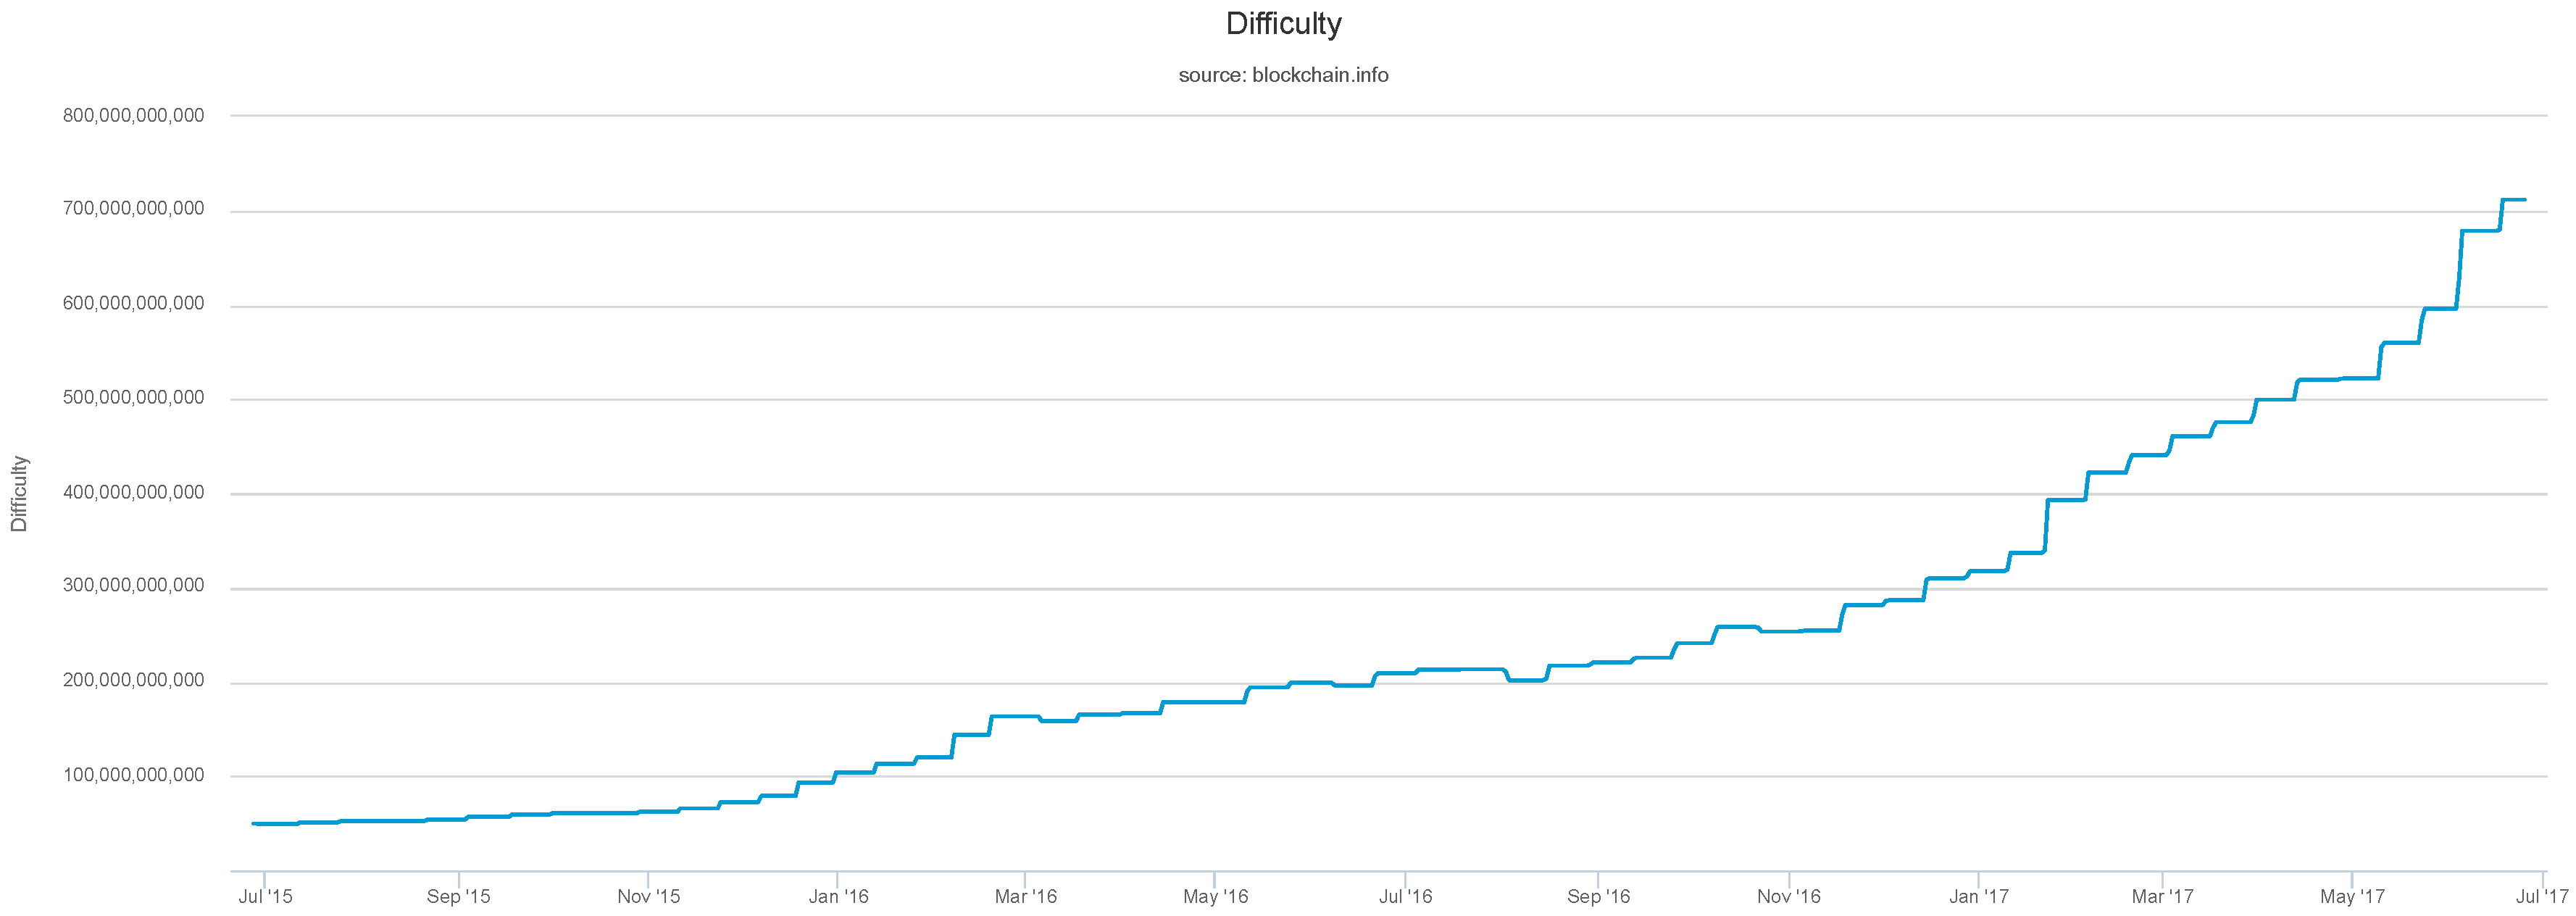 Bitcoin Future Difficulty : As The Price Of Bitcoin Has ...